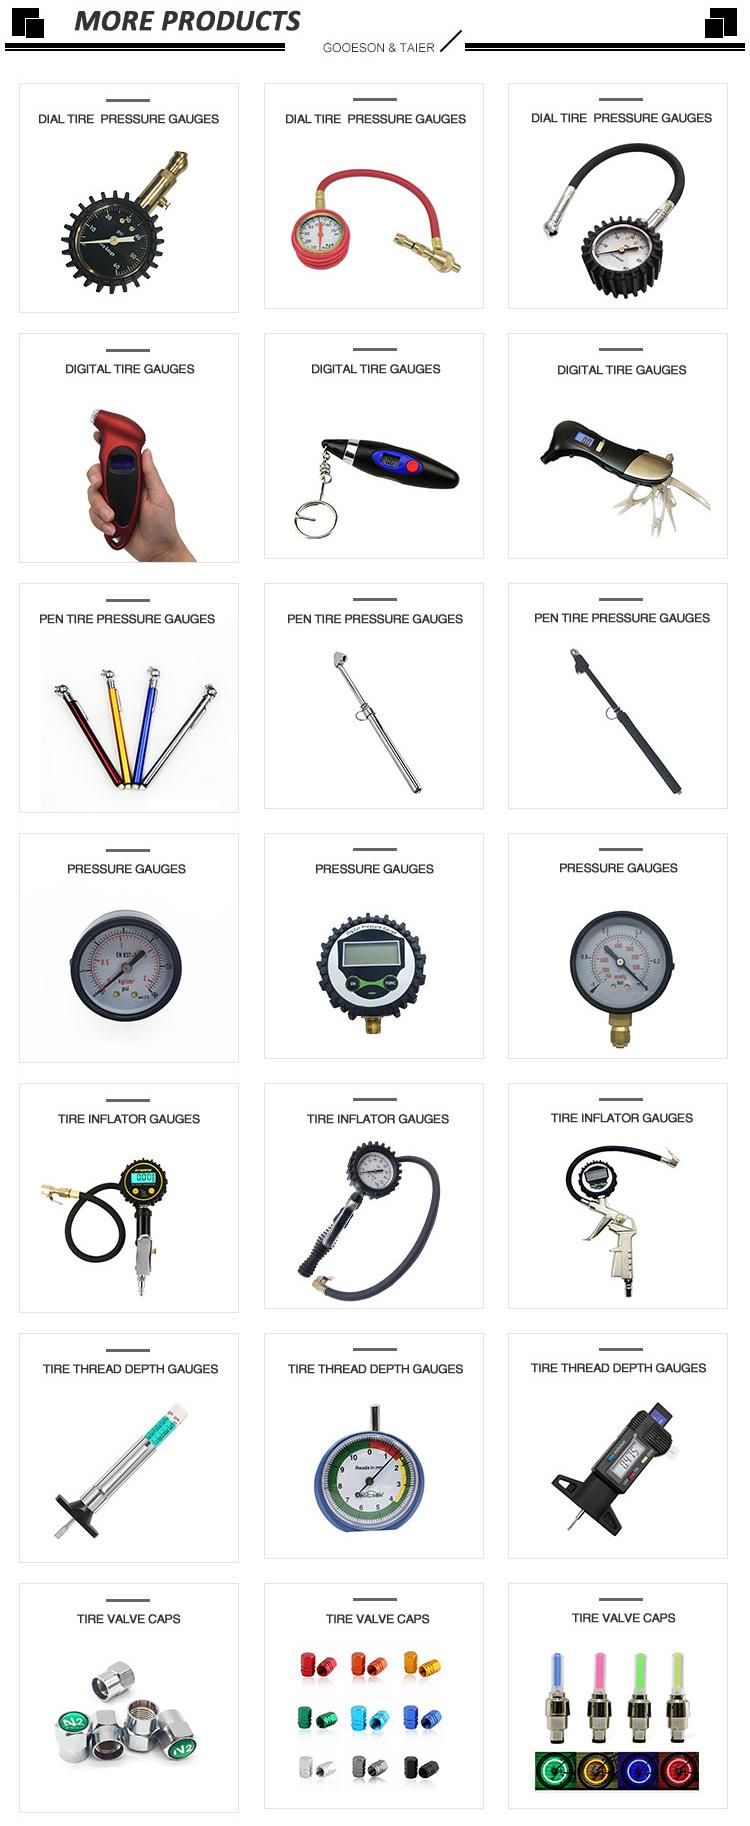 Dial Tire Air Pressure Gauge with a Rubber Hose and Clip-on Design Enables Hands-Free Chuck